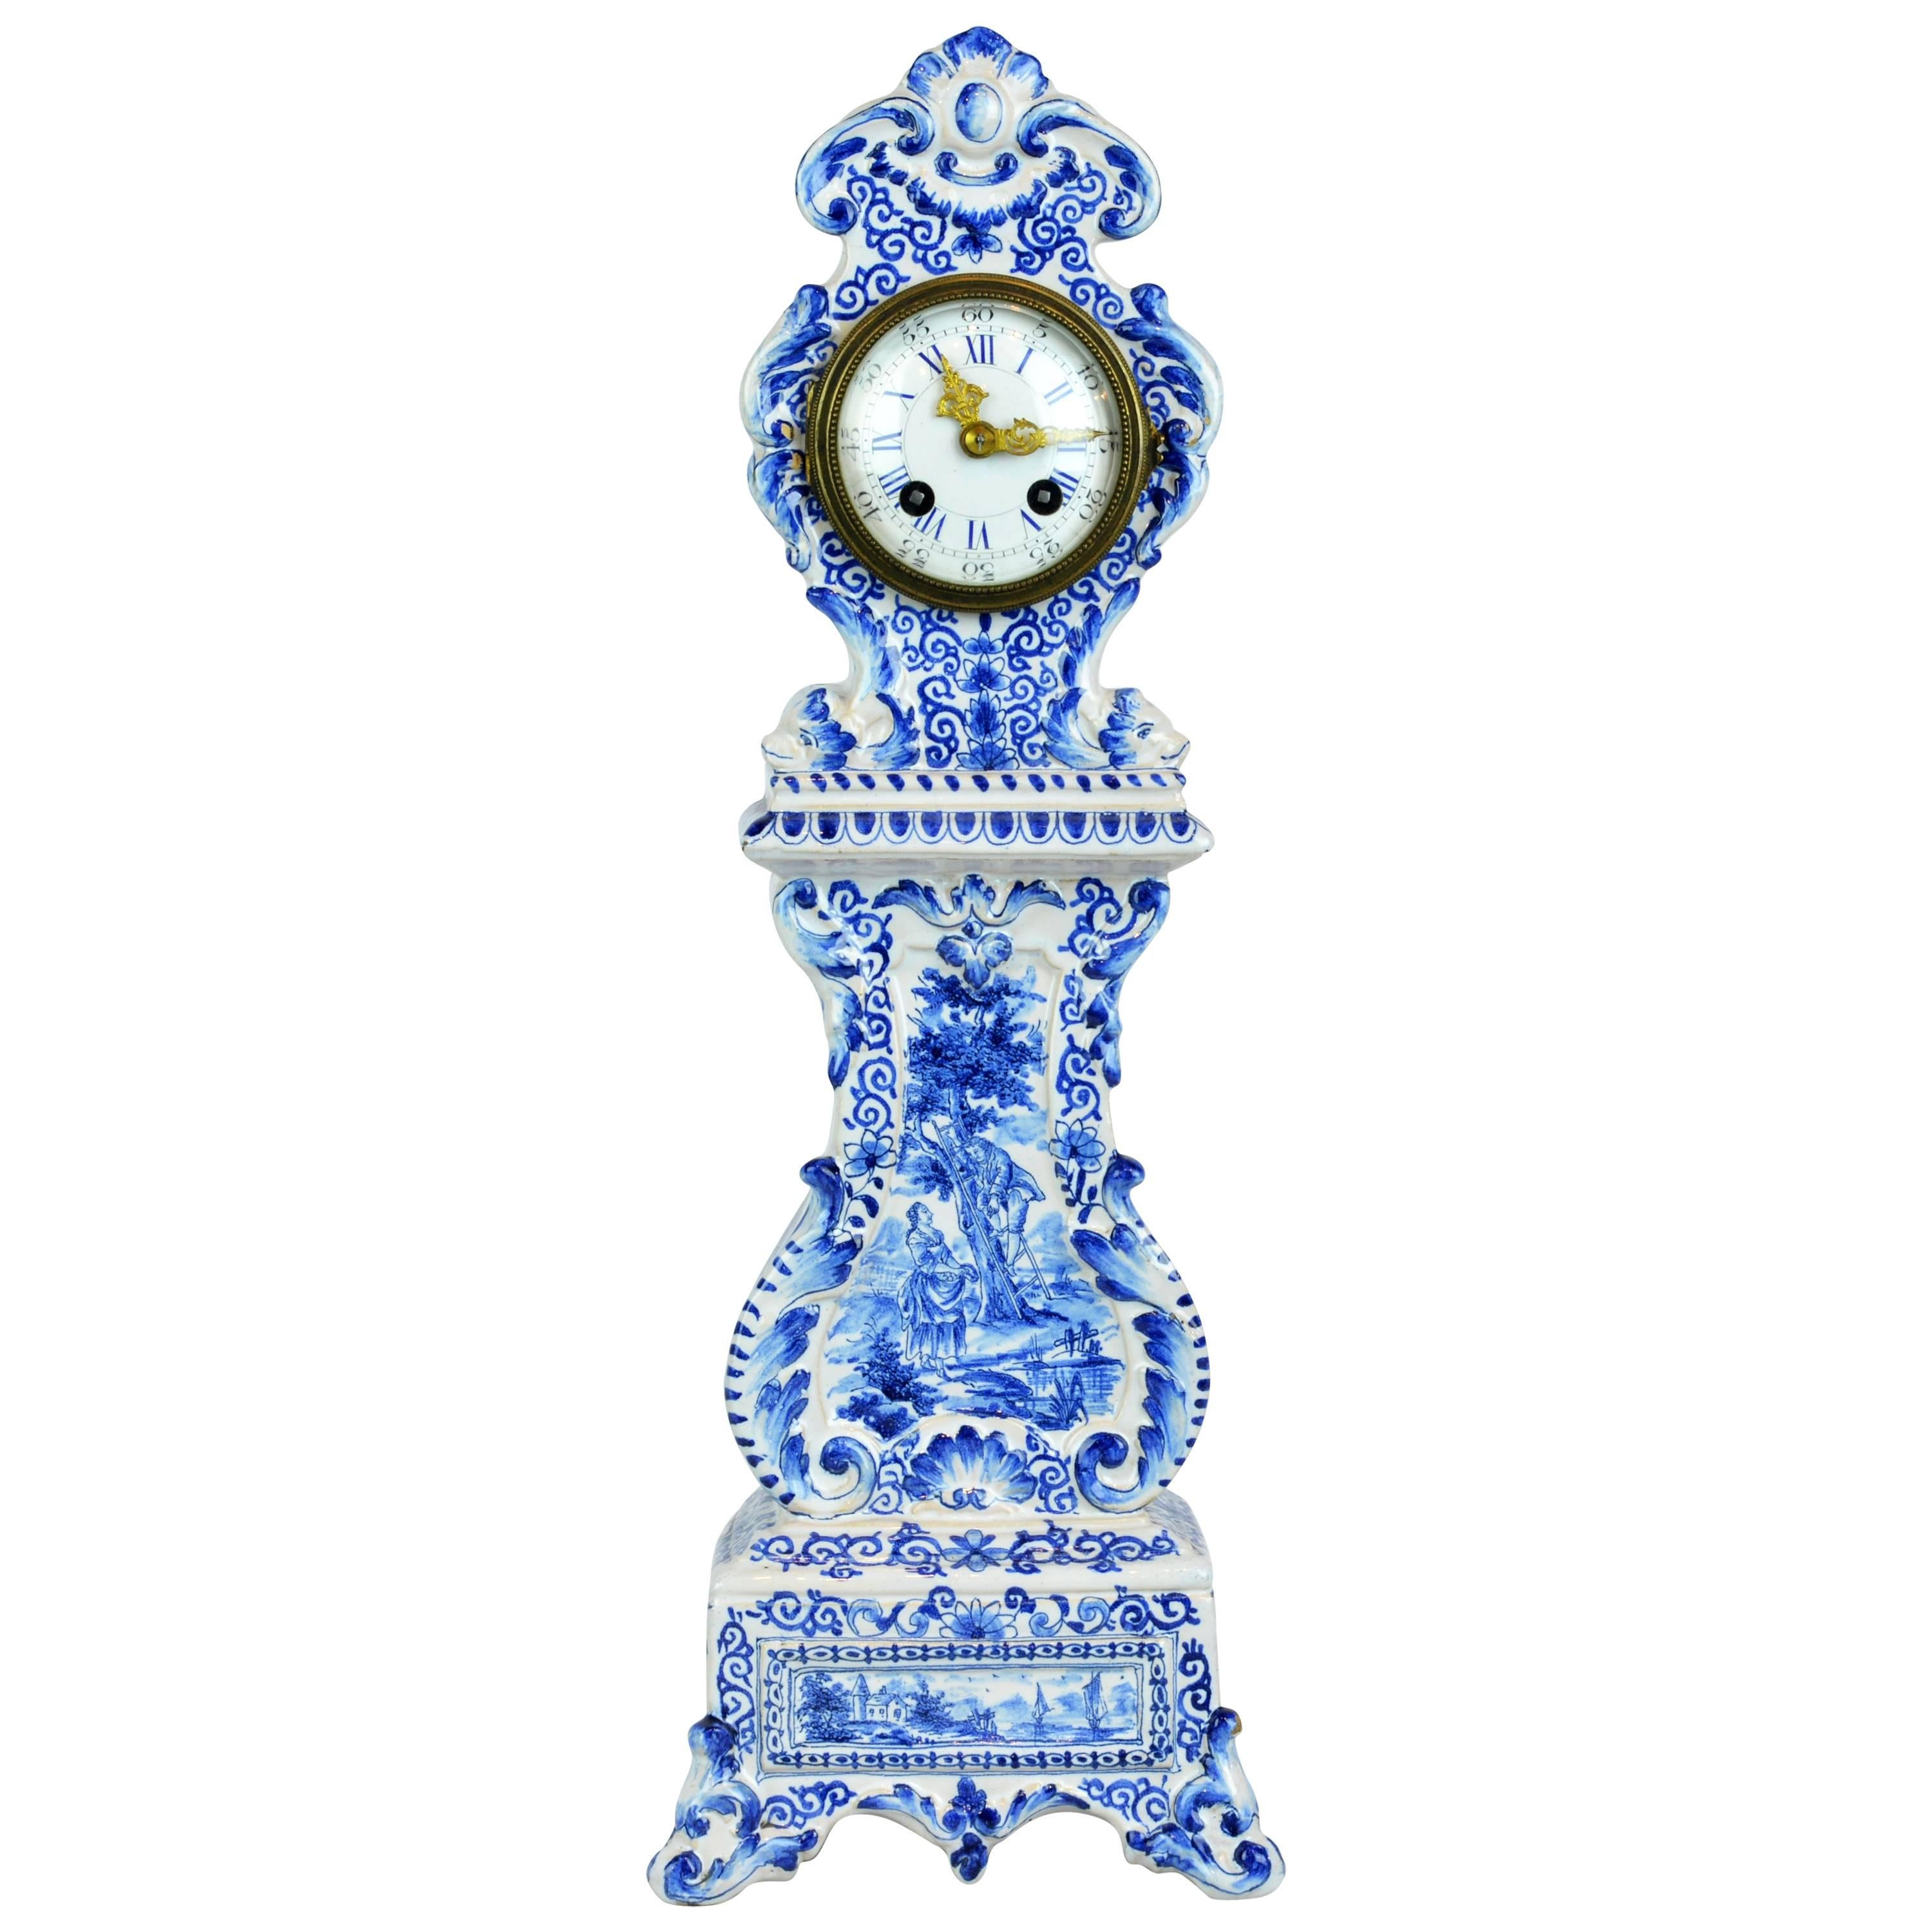 Charming 19th Century Delft Style Miniature Blue and White Porcelain Tall Clock